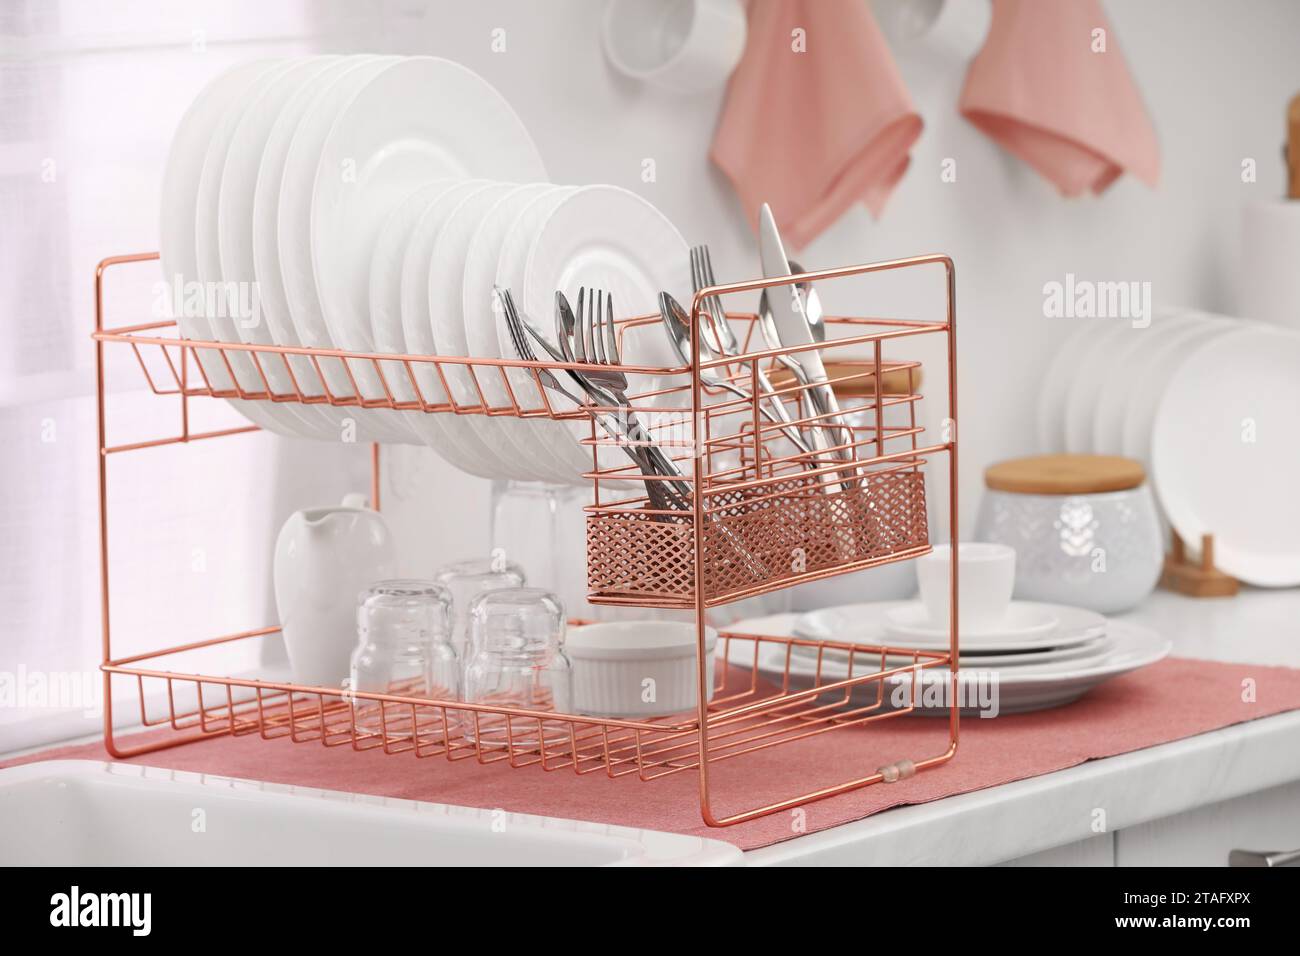 https://c8.alamy.com/comp/2TAFXPX/drying-rack-with-clean-dishes-and-cutlery-on-countertop-in-kitchen-2TAFXPX.jpg